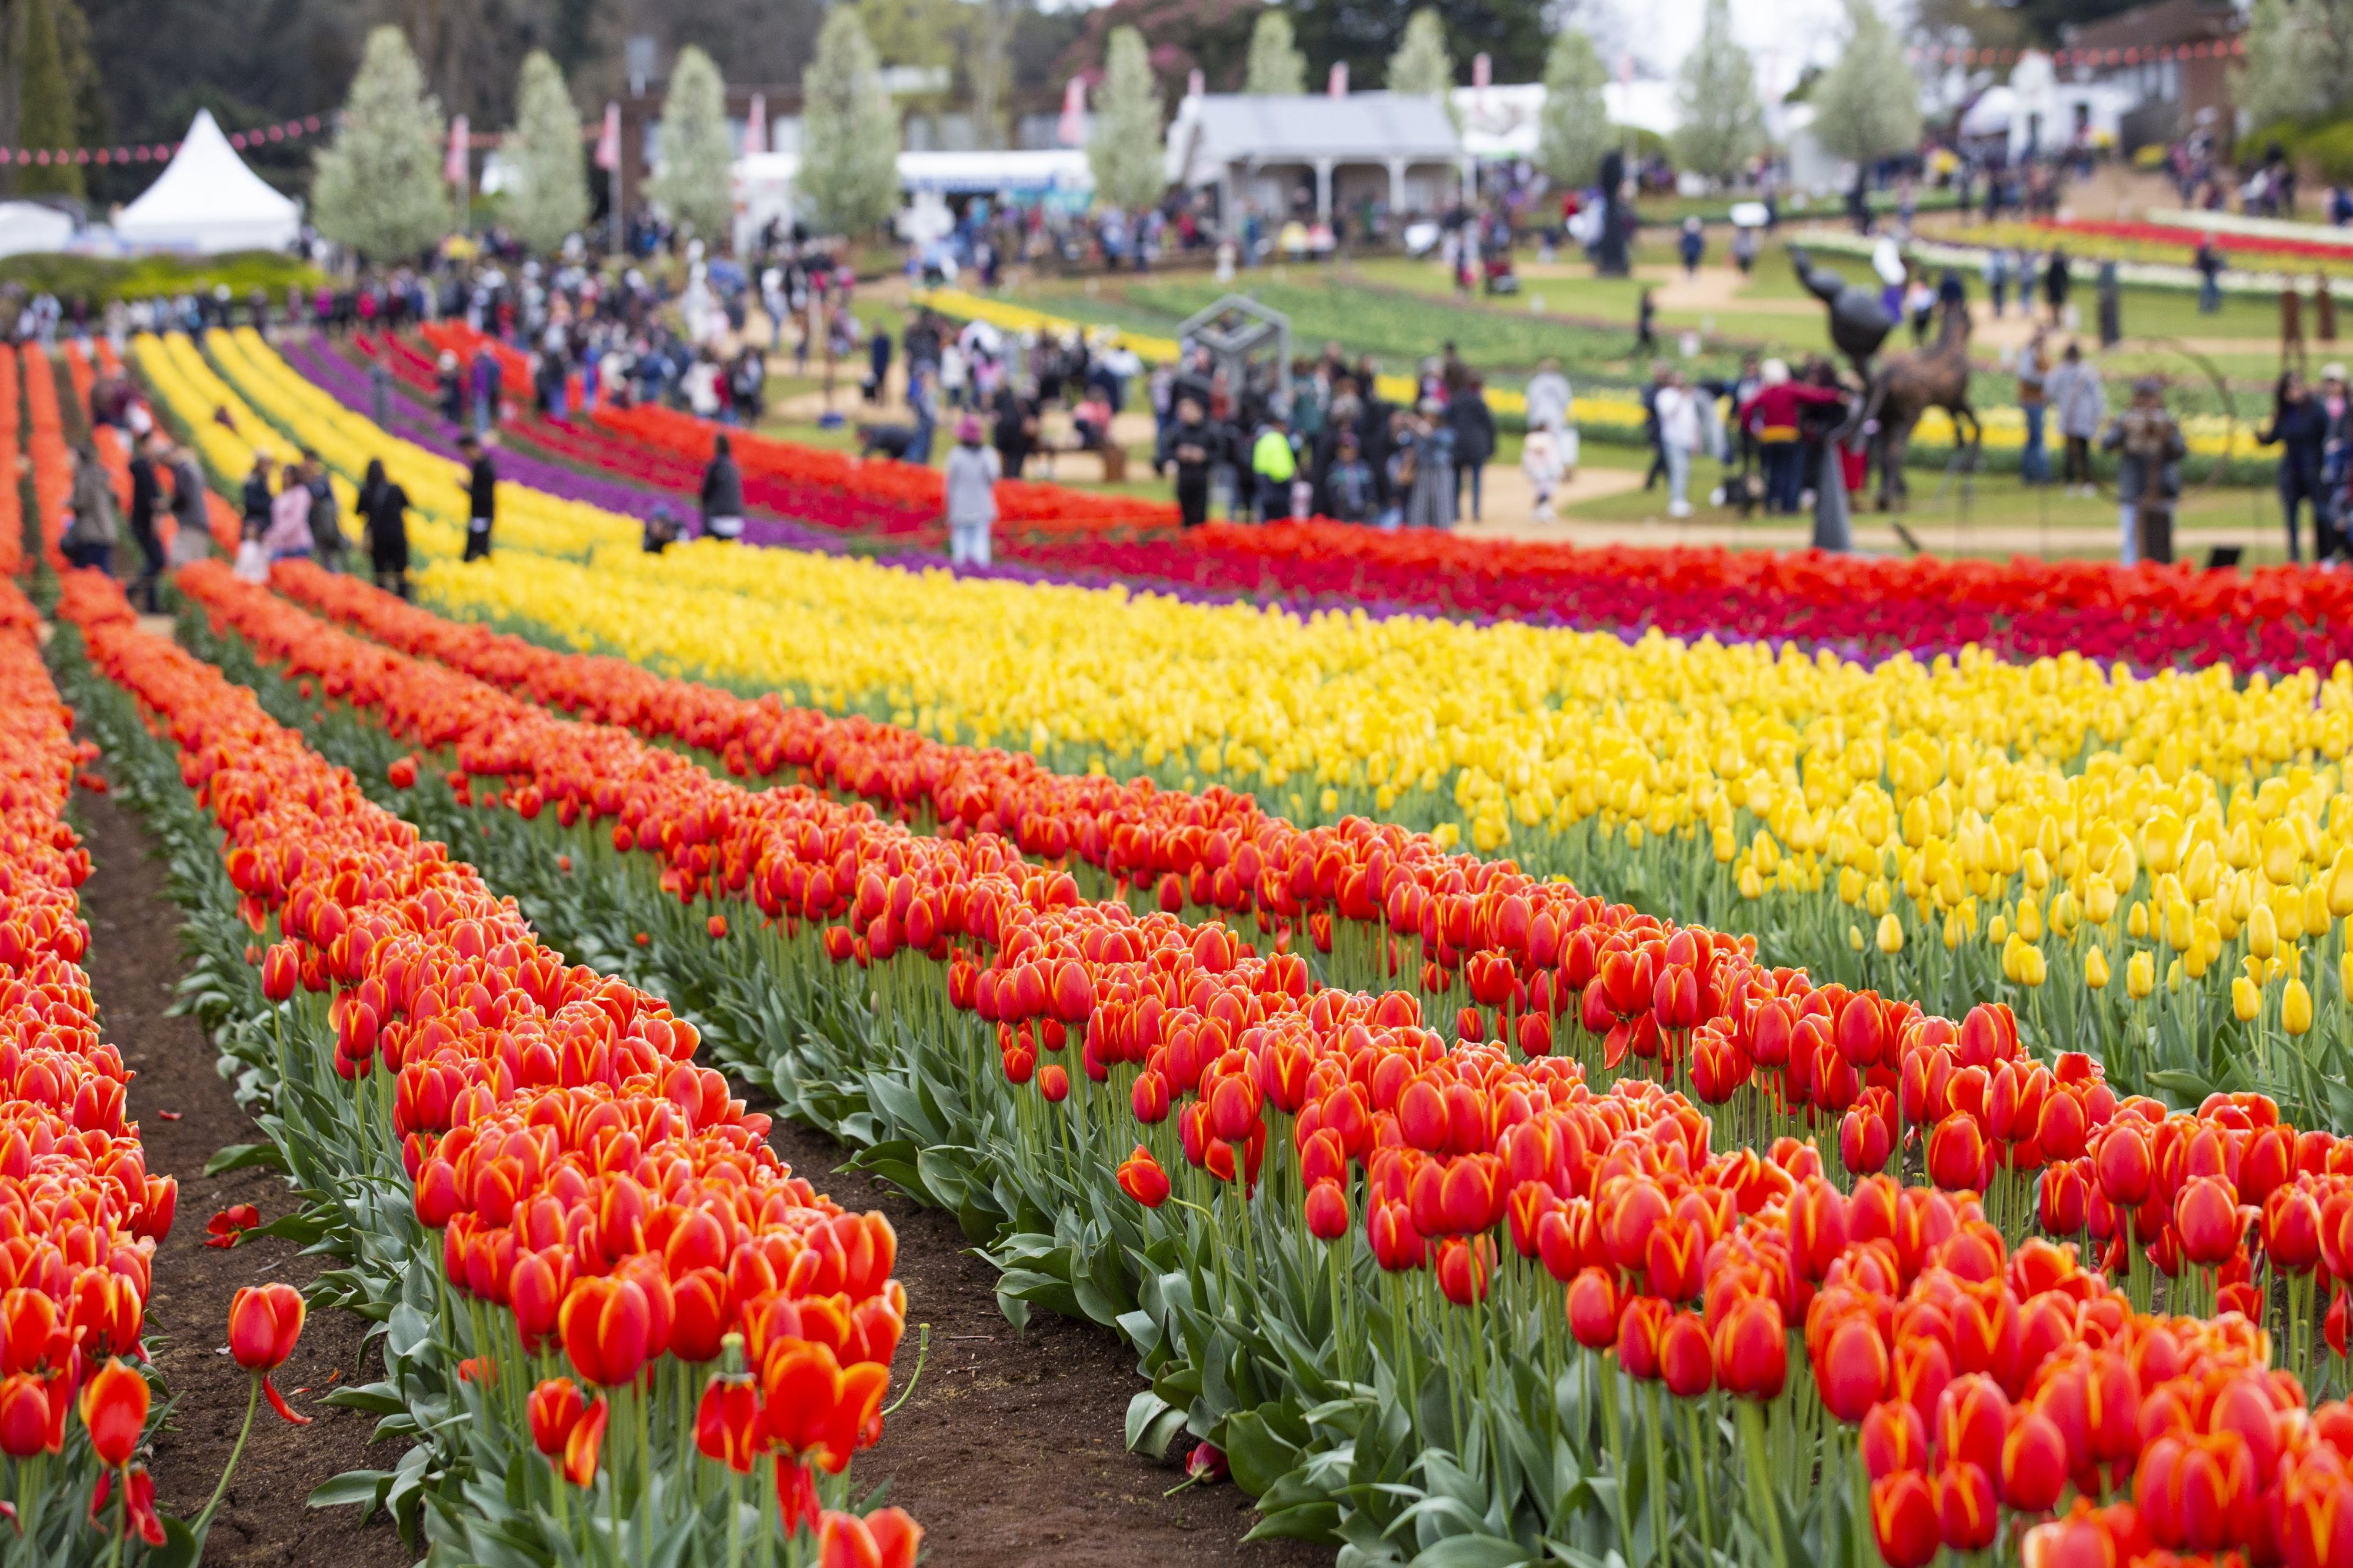 surround-yourself-with-900-000-flowers-at-this-huge-tulip-festival-beat-magazine